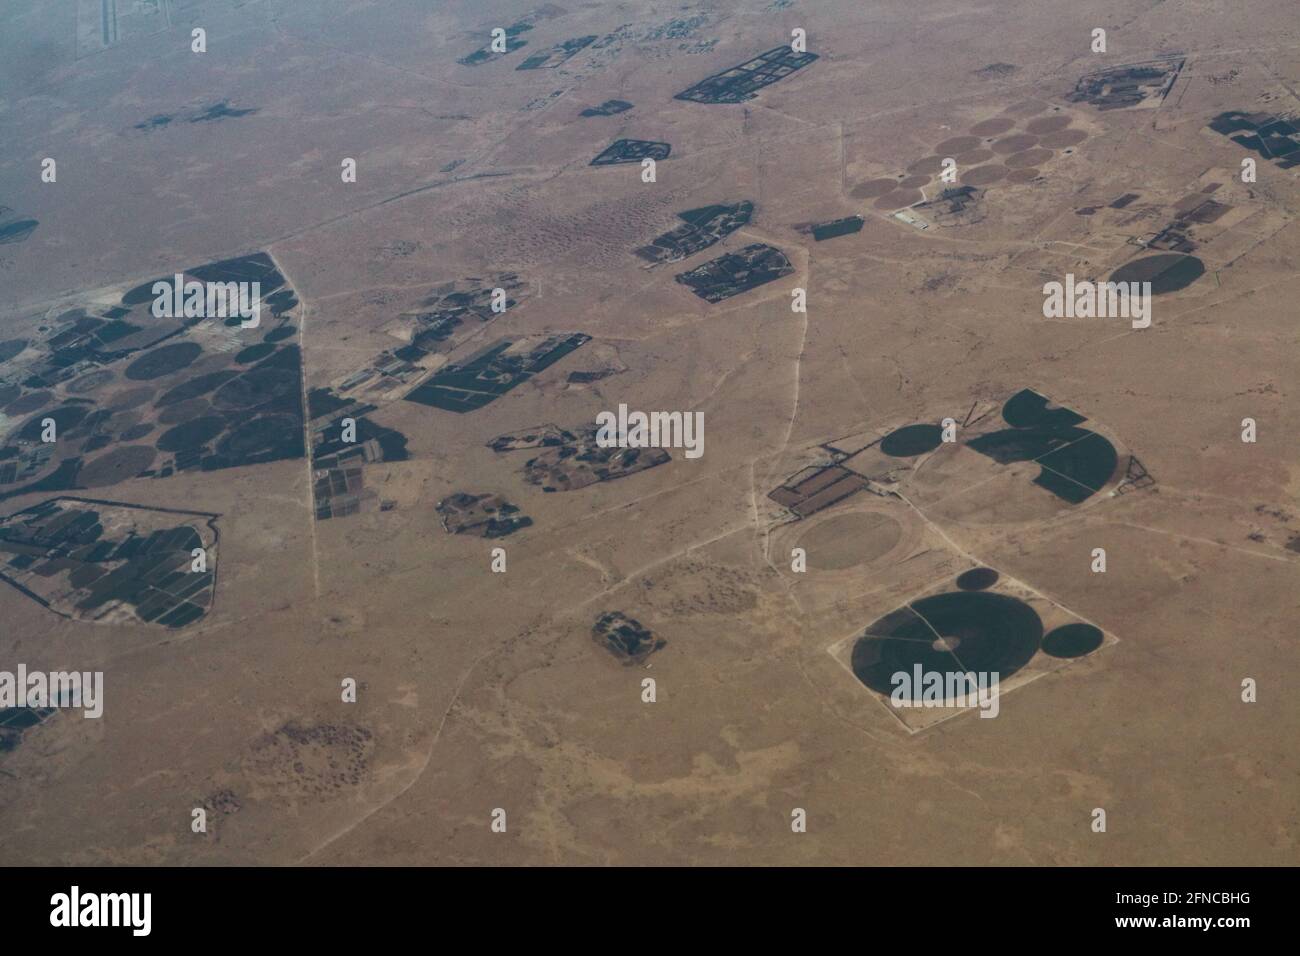 Doha – Qatar, May 12, 2021: Aerial view showing circular irrigation patterns of farms surrounded by desert Stock Photo